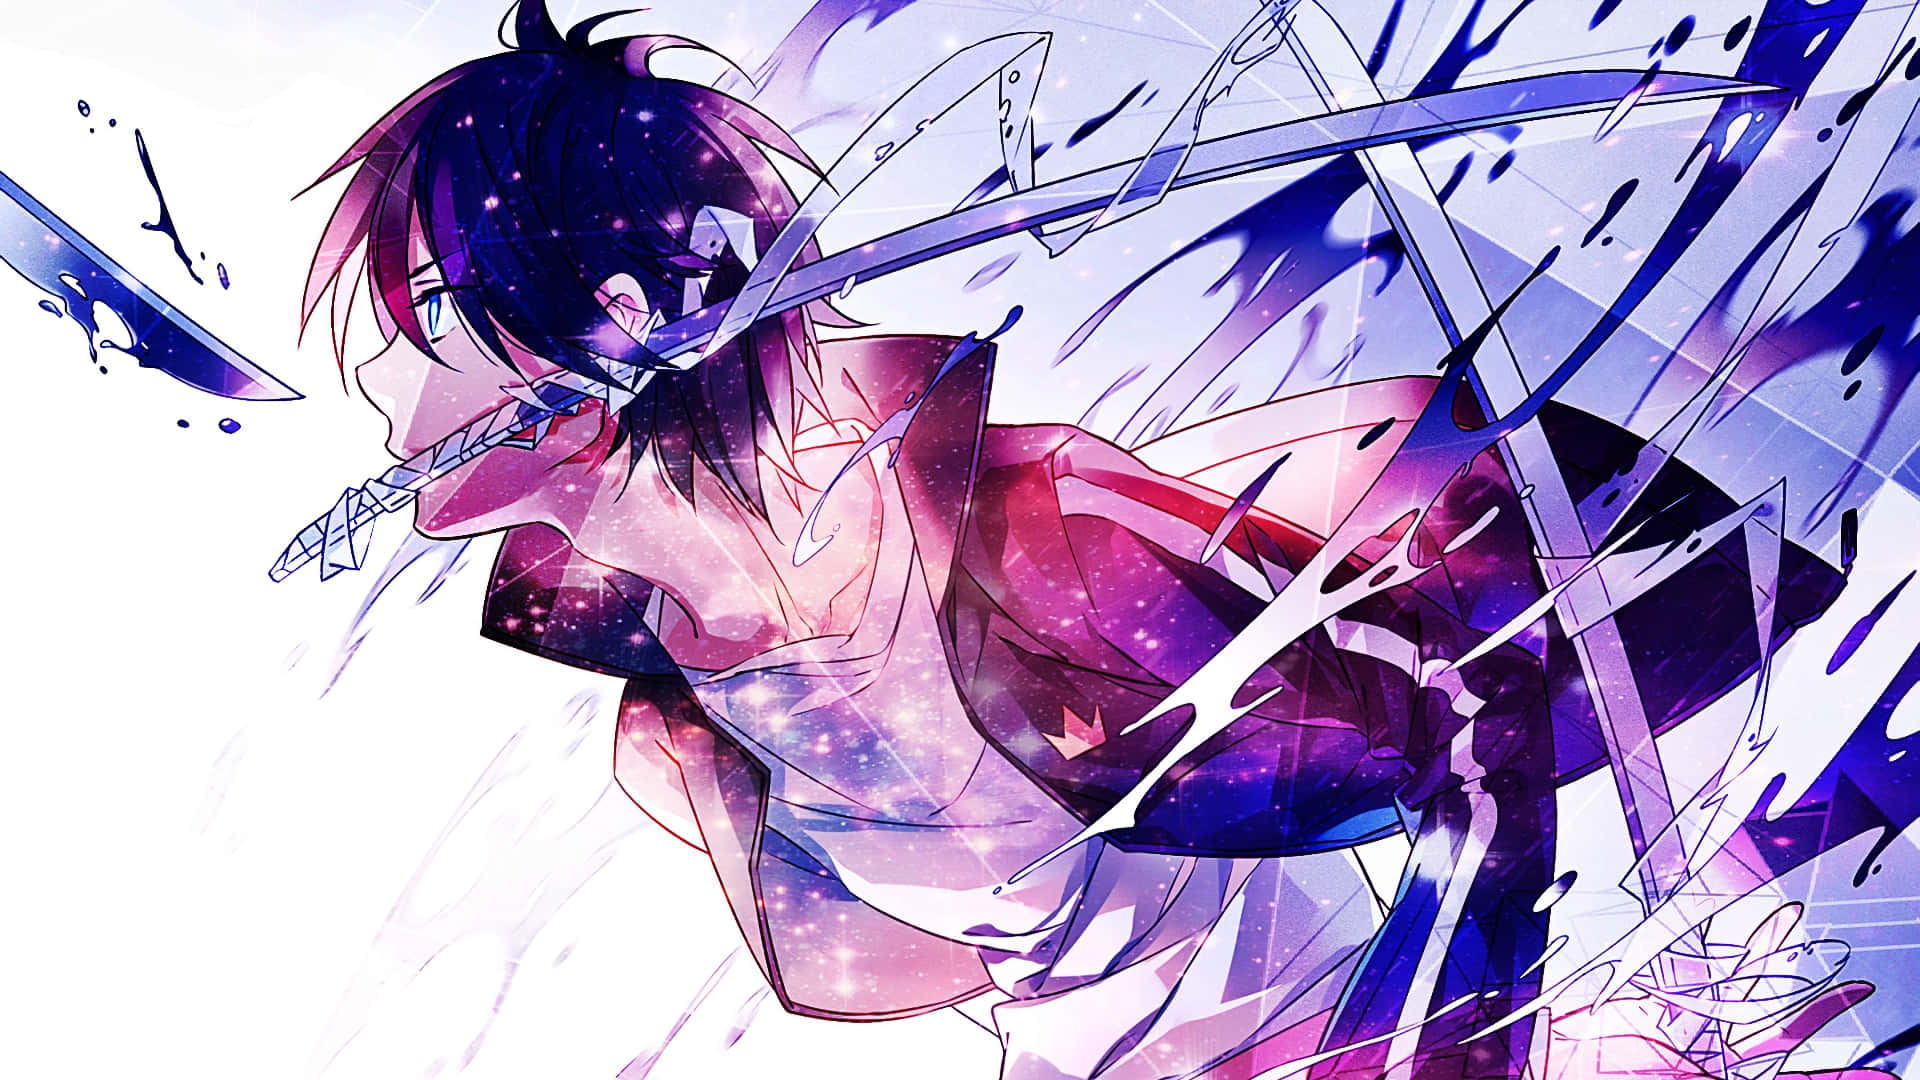 Take a journey through the underworld with Noragami